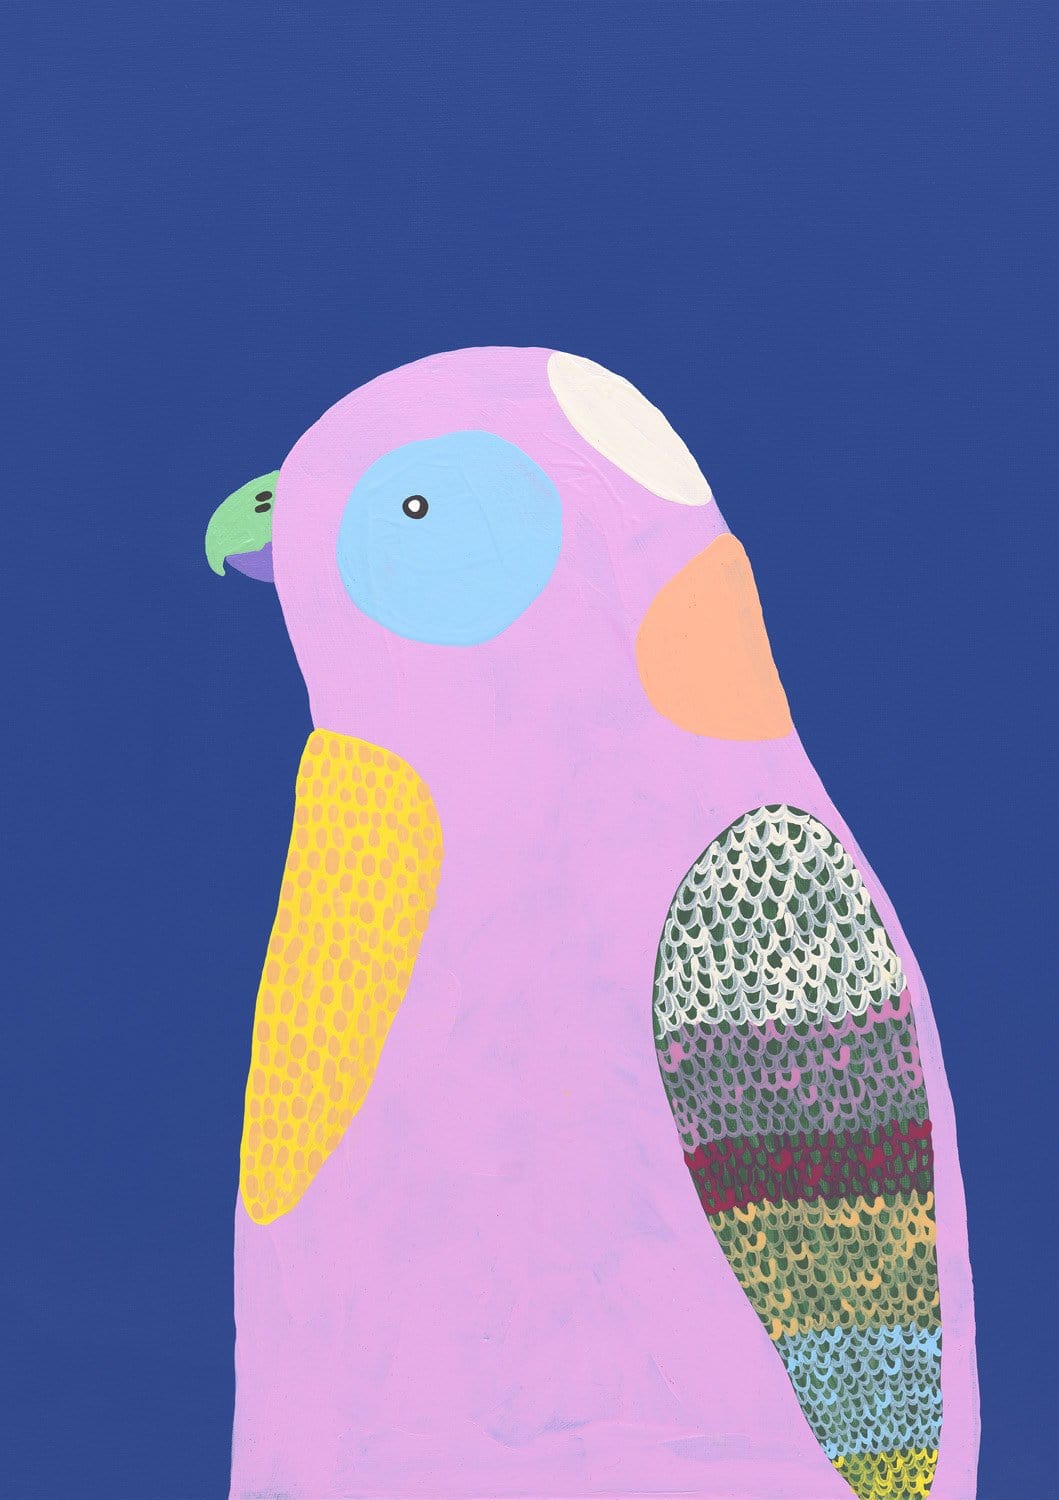 Sweet Face I (Lilac Parrot) - Art Print-Prints-Madeleine Stamer-Greenhouse Interiors